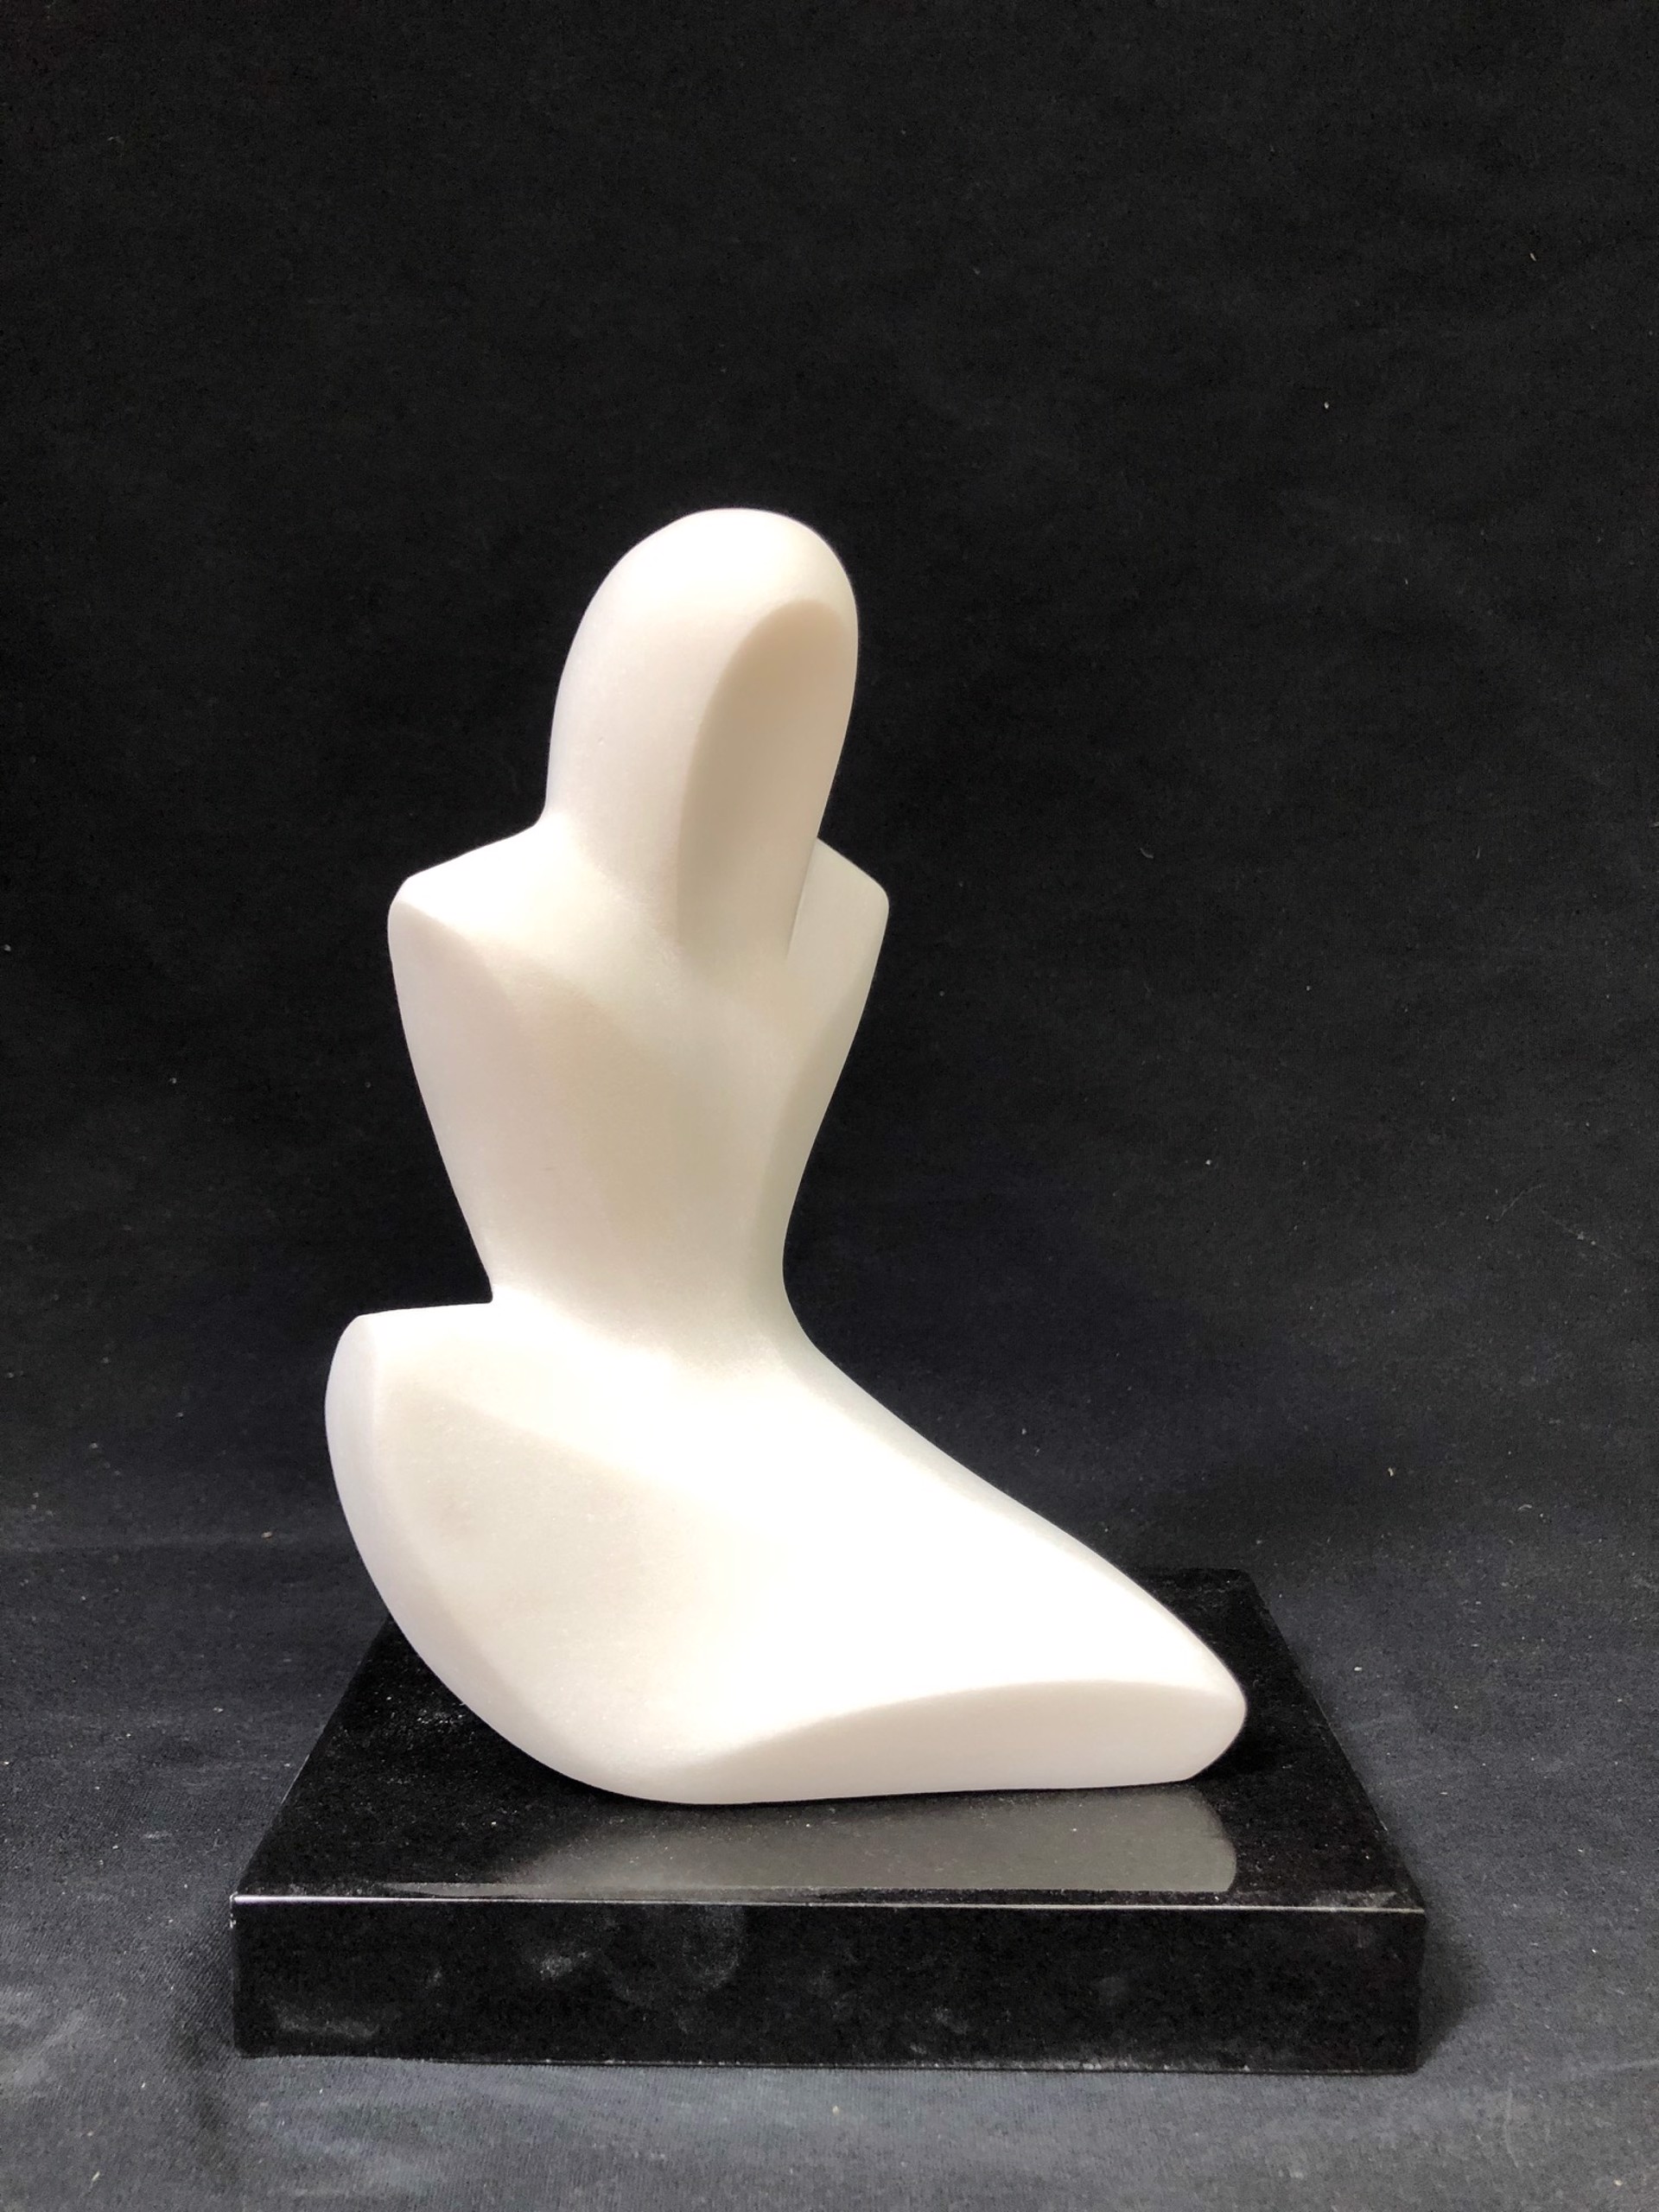 Seated Figure 2 (Maquette) by Steven Lustig